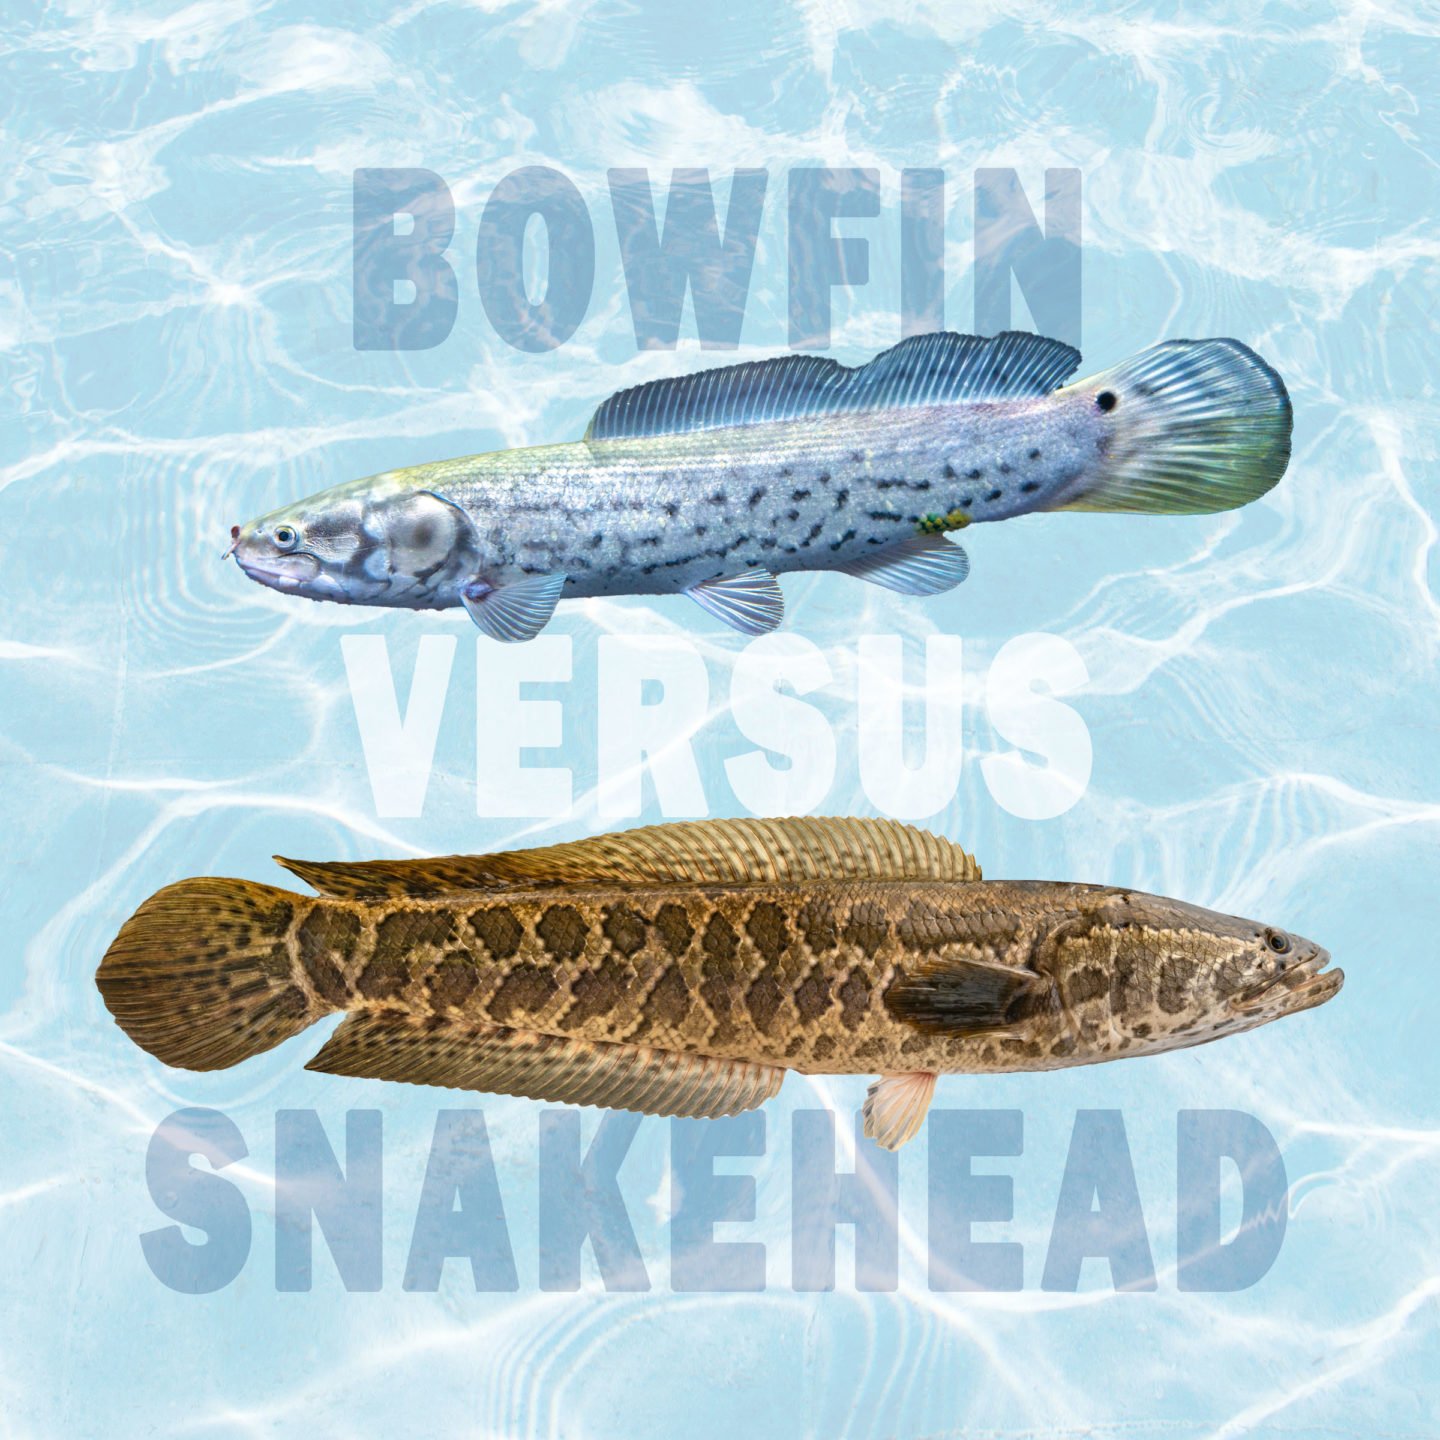 bowfin vs snakehead differences